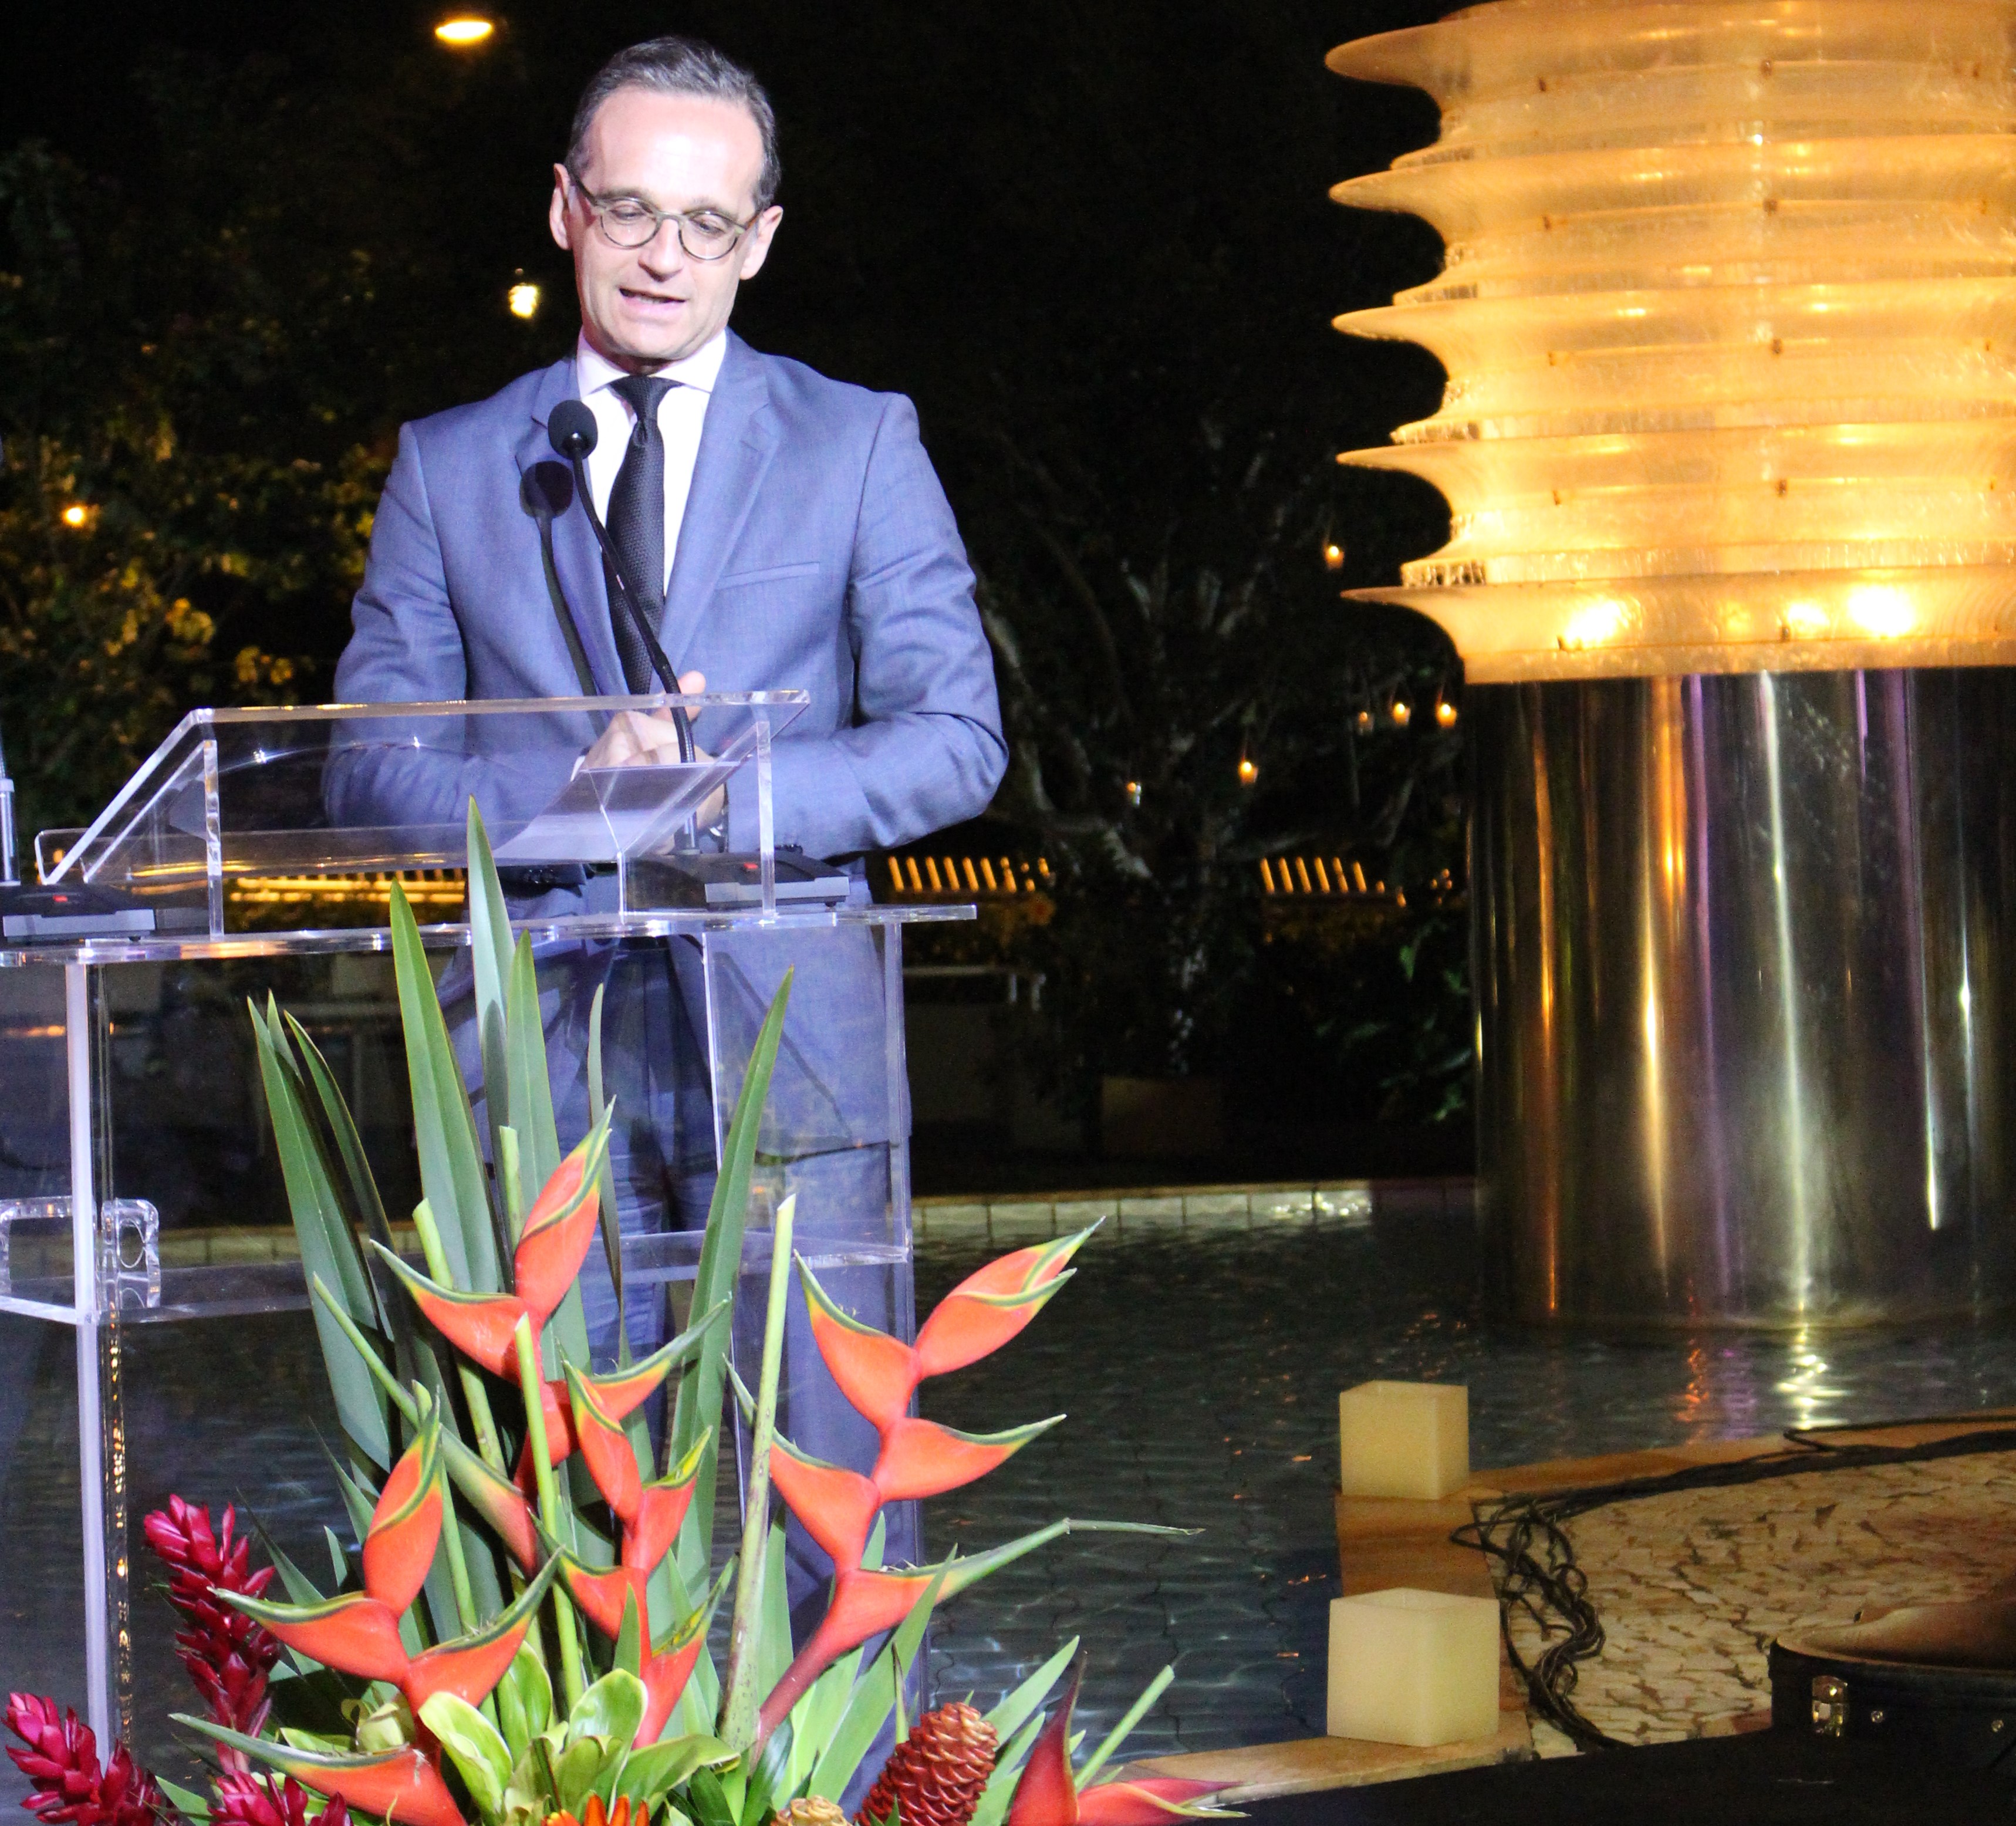 Foreign minister Heiko Maas speaking at the German embassy in Brasília